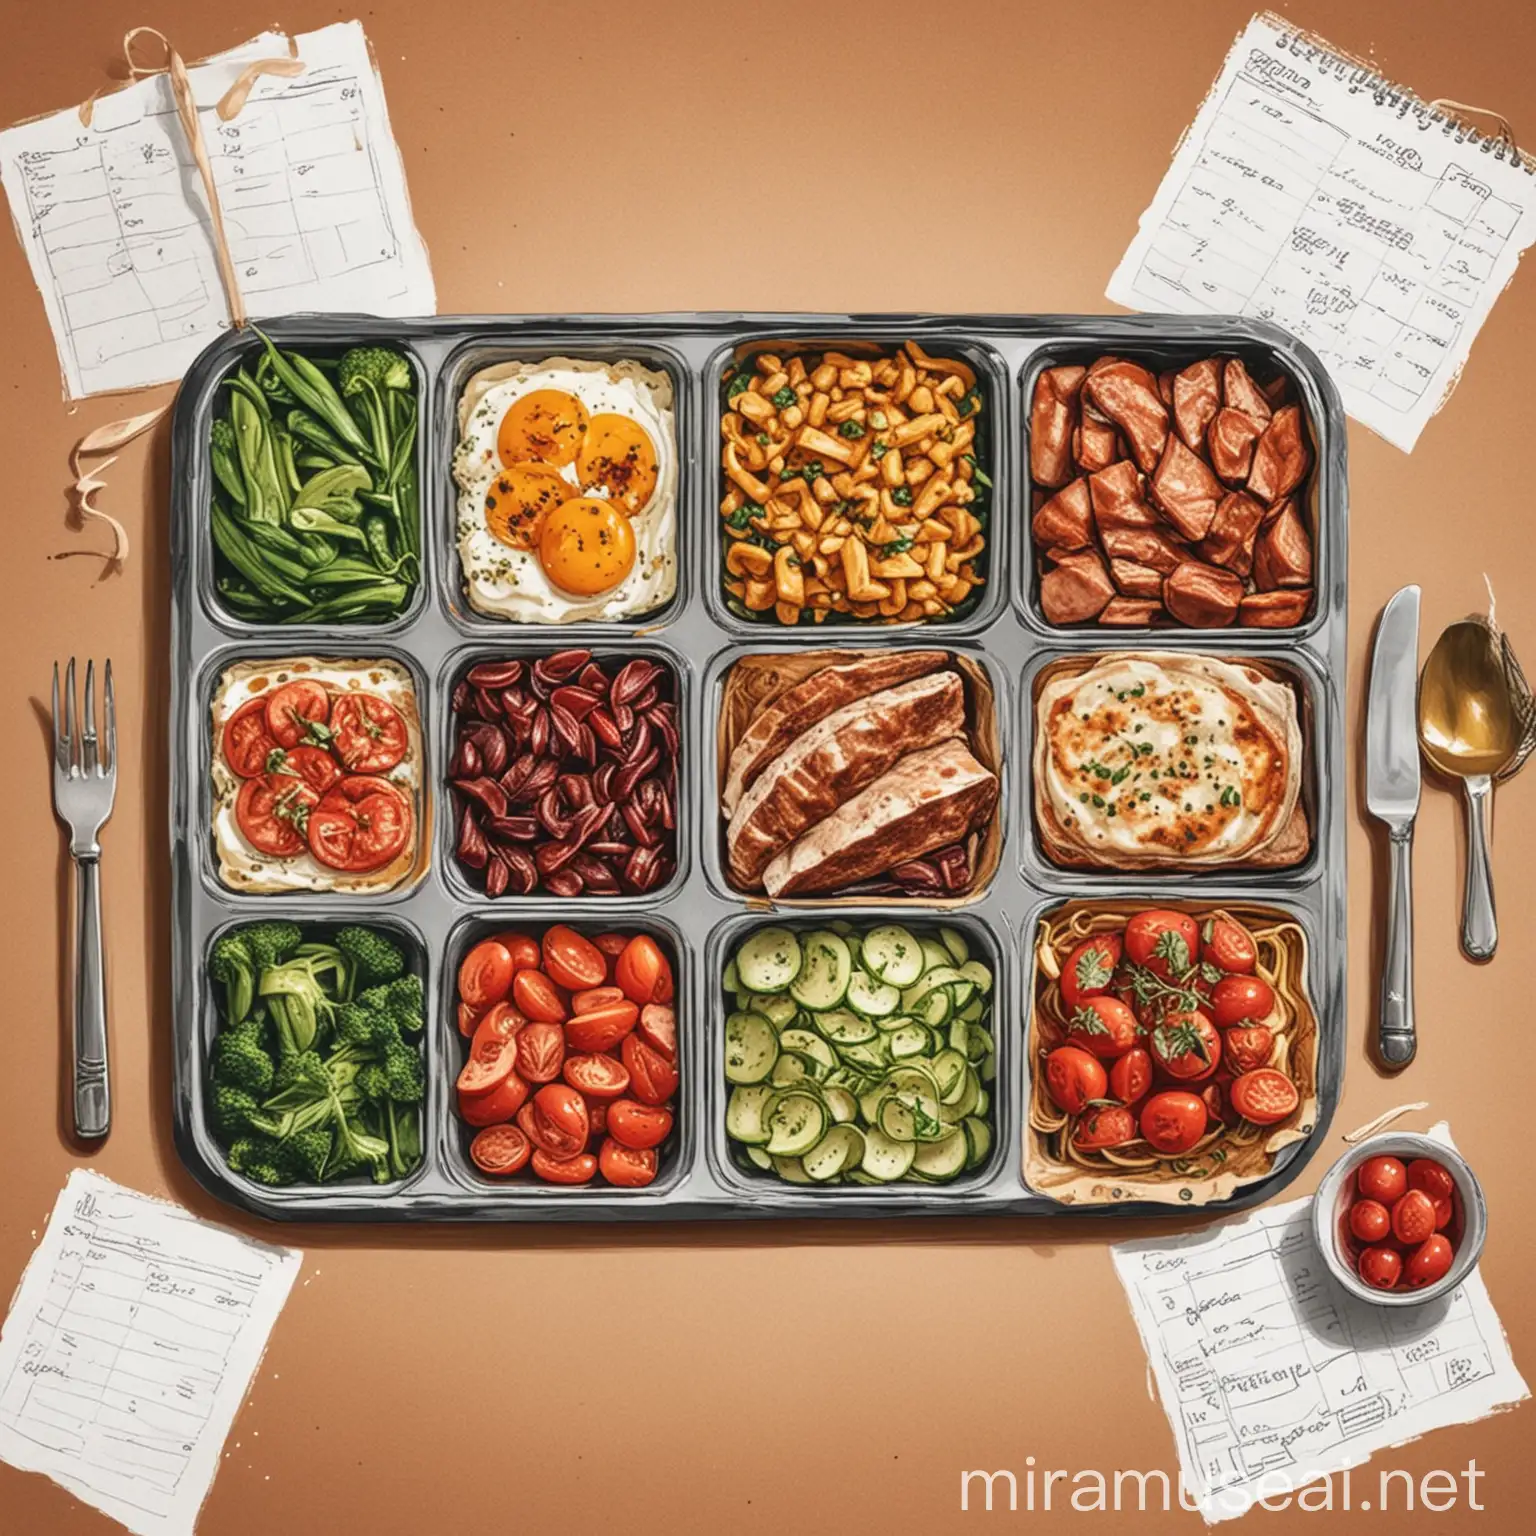 Colorful Meal Planning Illustration with Fresh Ingredients and Cooking Utensils